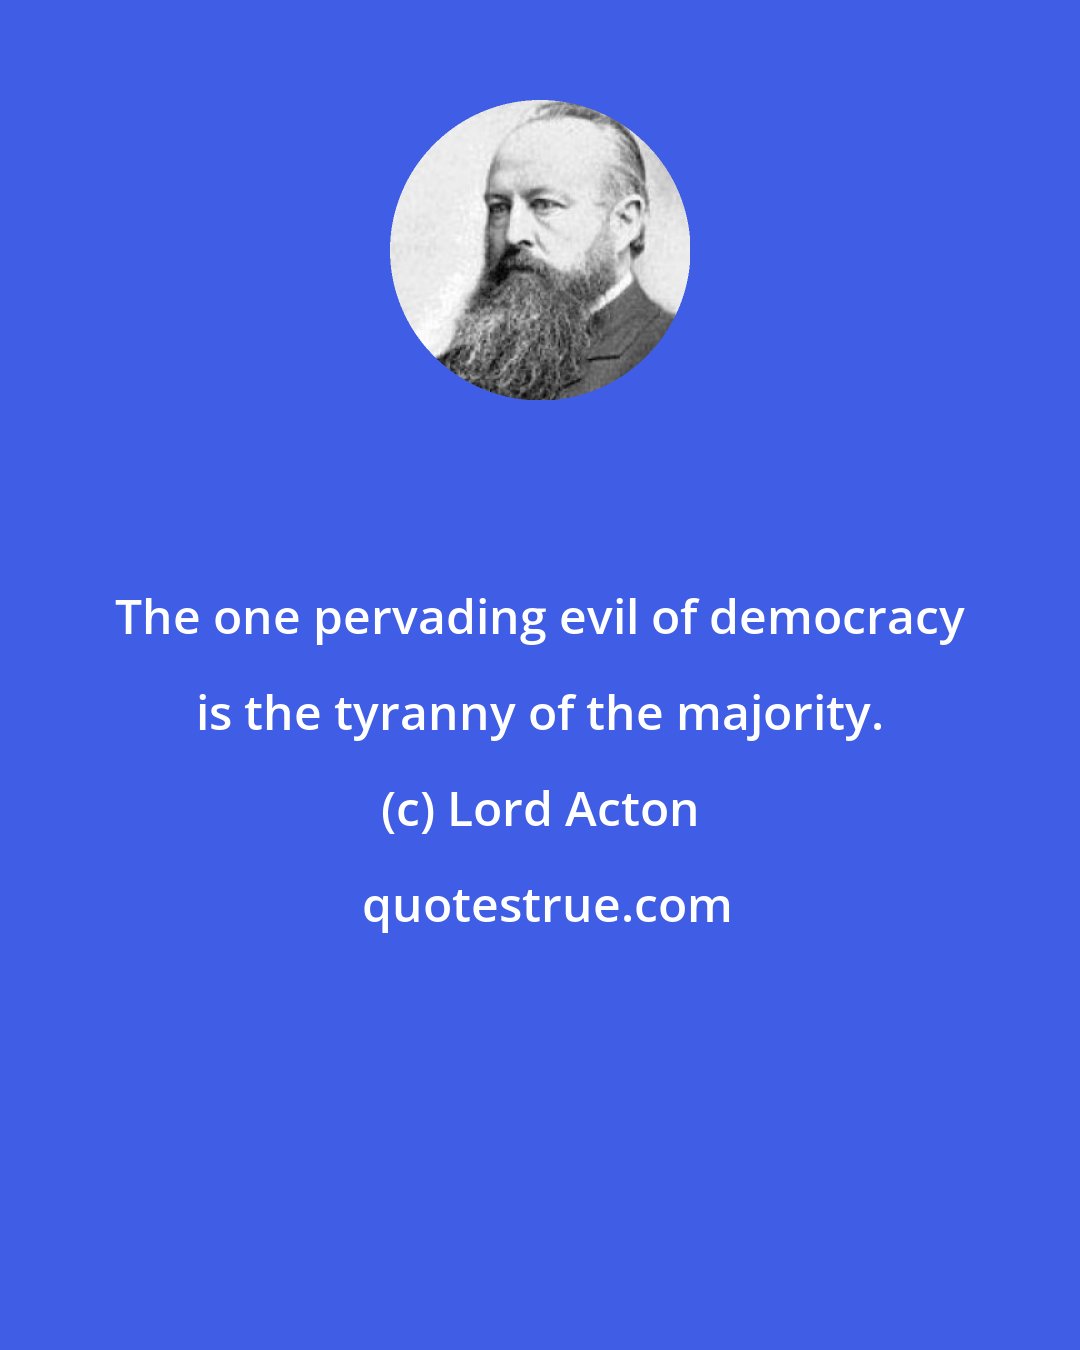 Lord Acton: The one pervading evil of democracy is the tyranny of the majority.